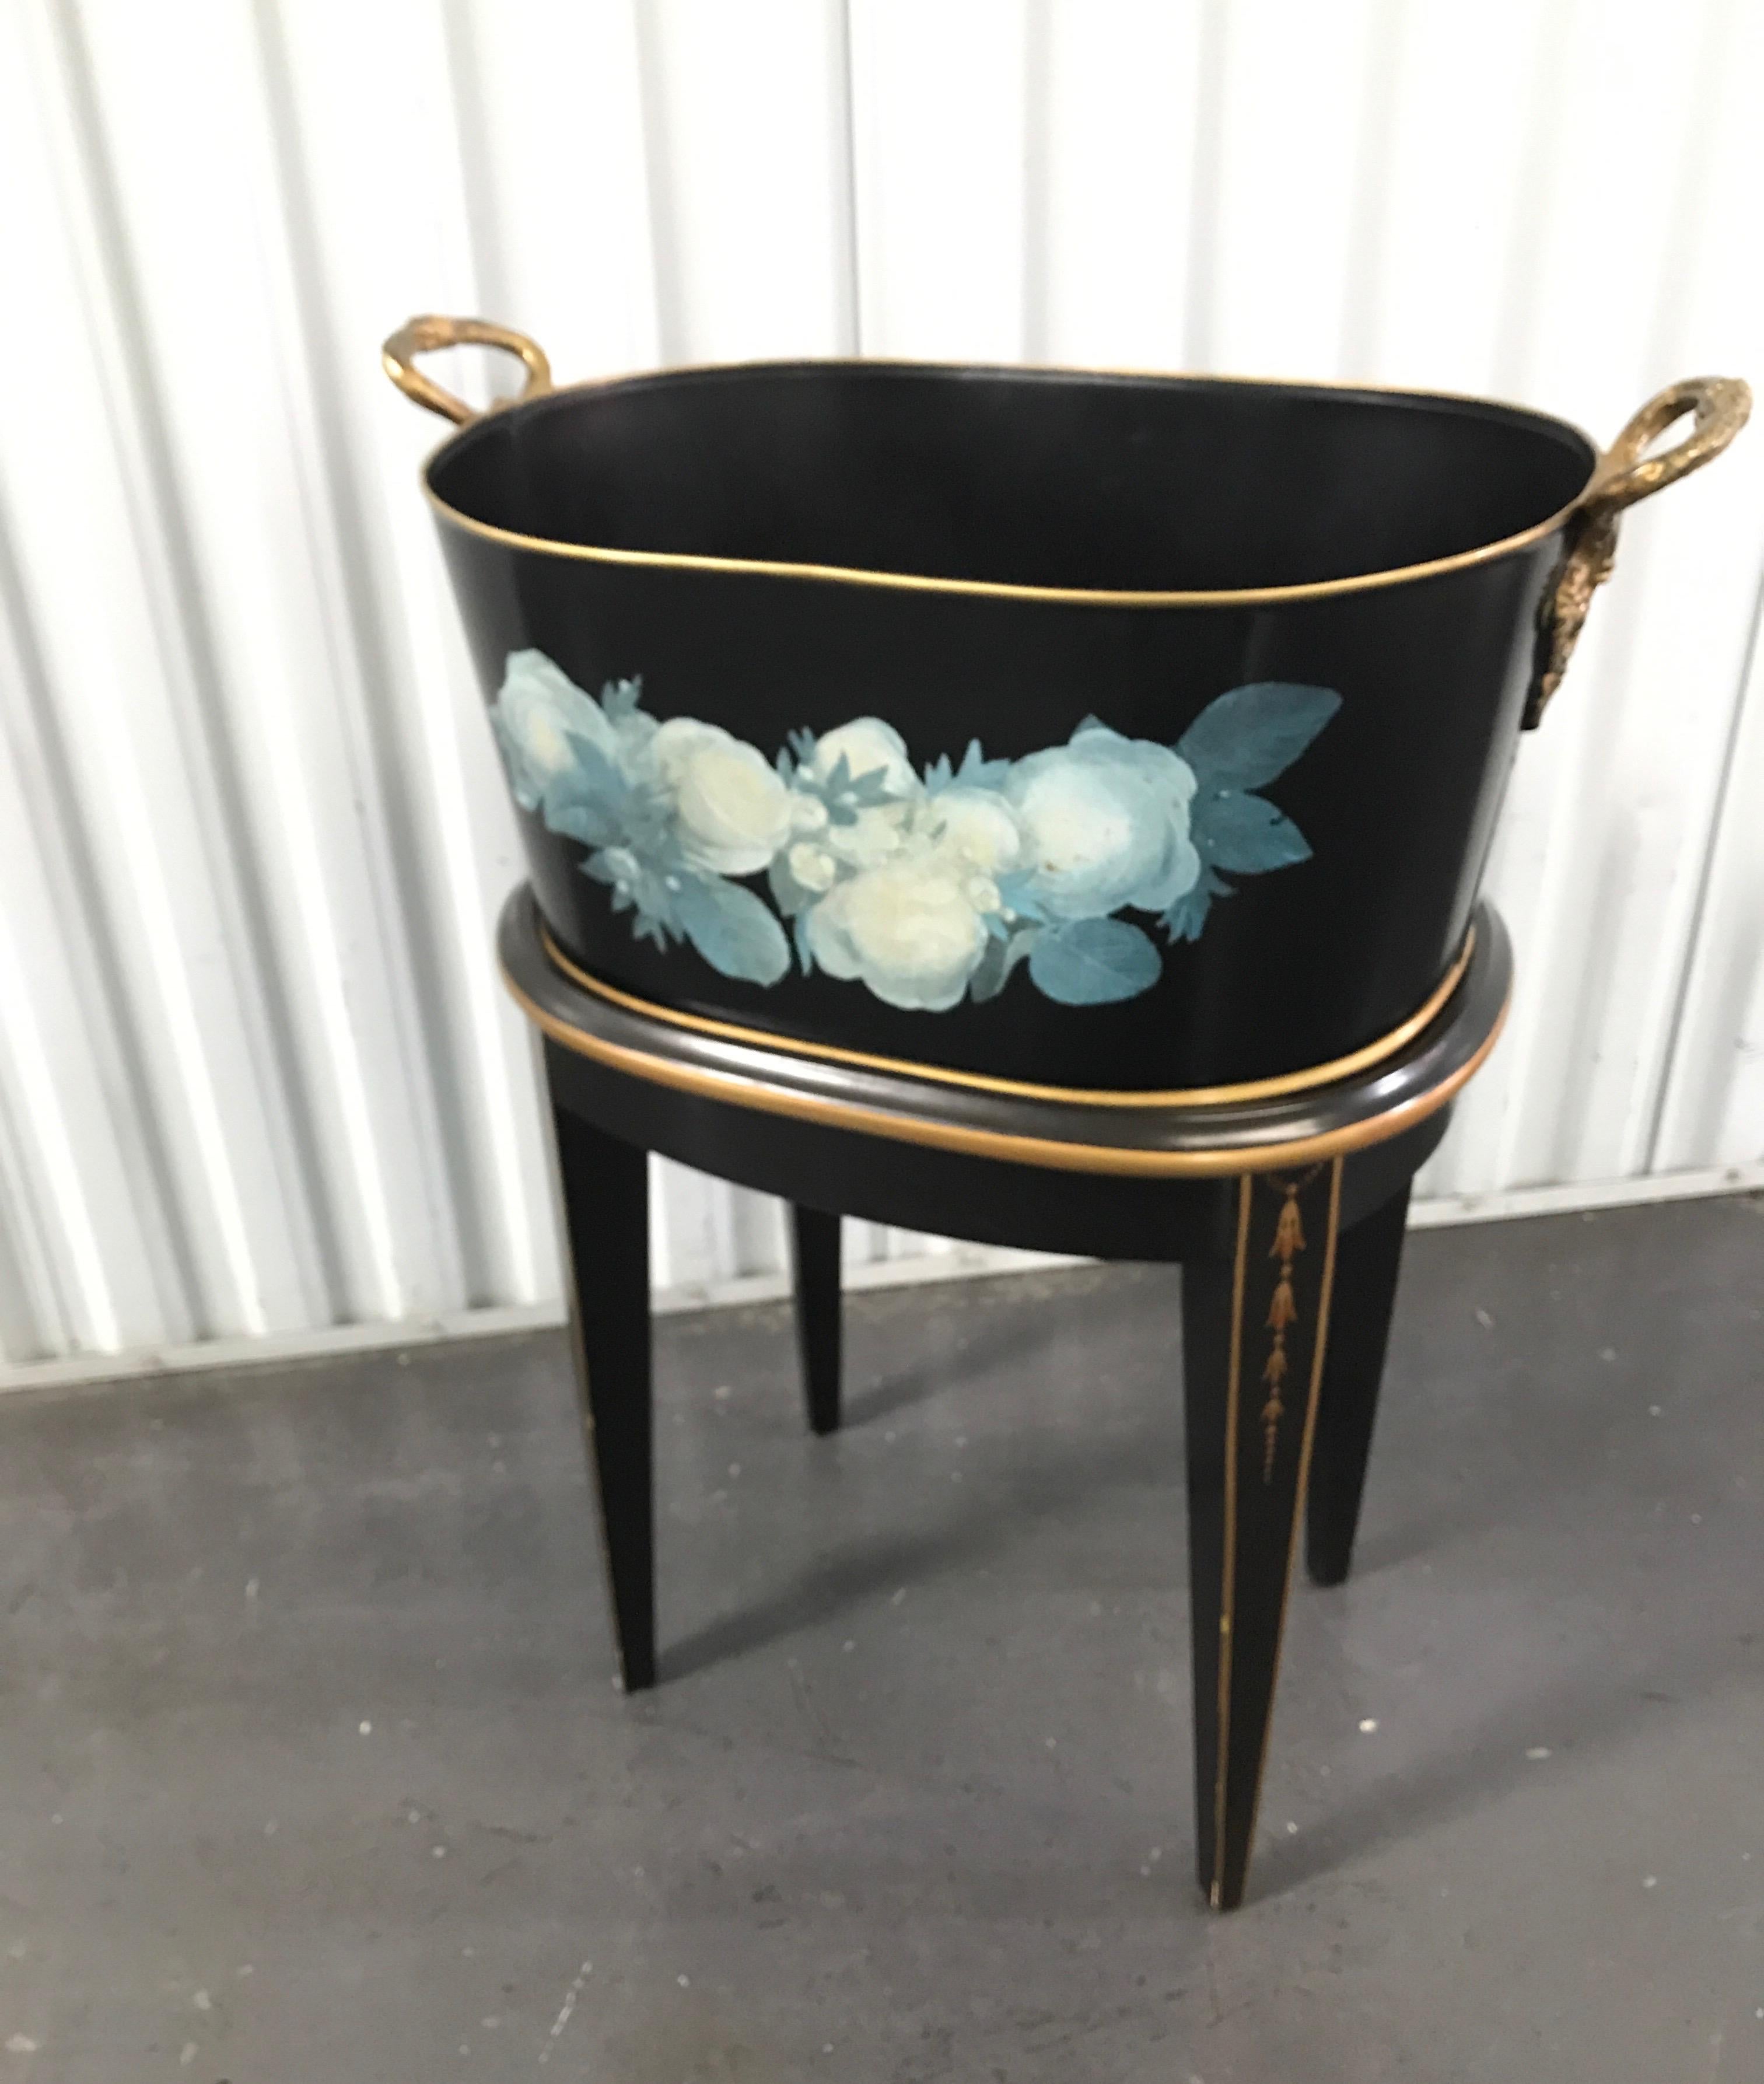 20th Century Italian Hand Painted Tole Planter on Stand